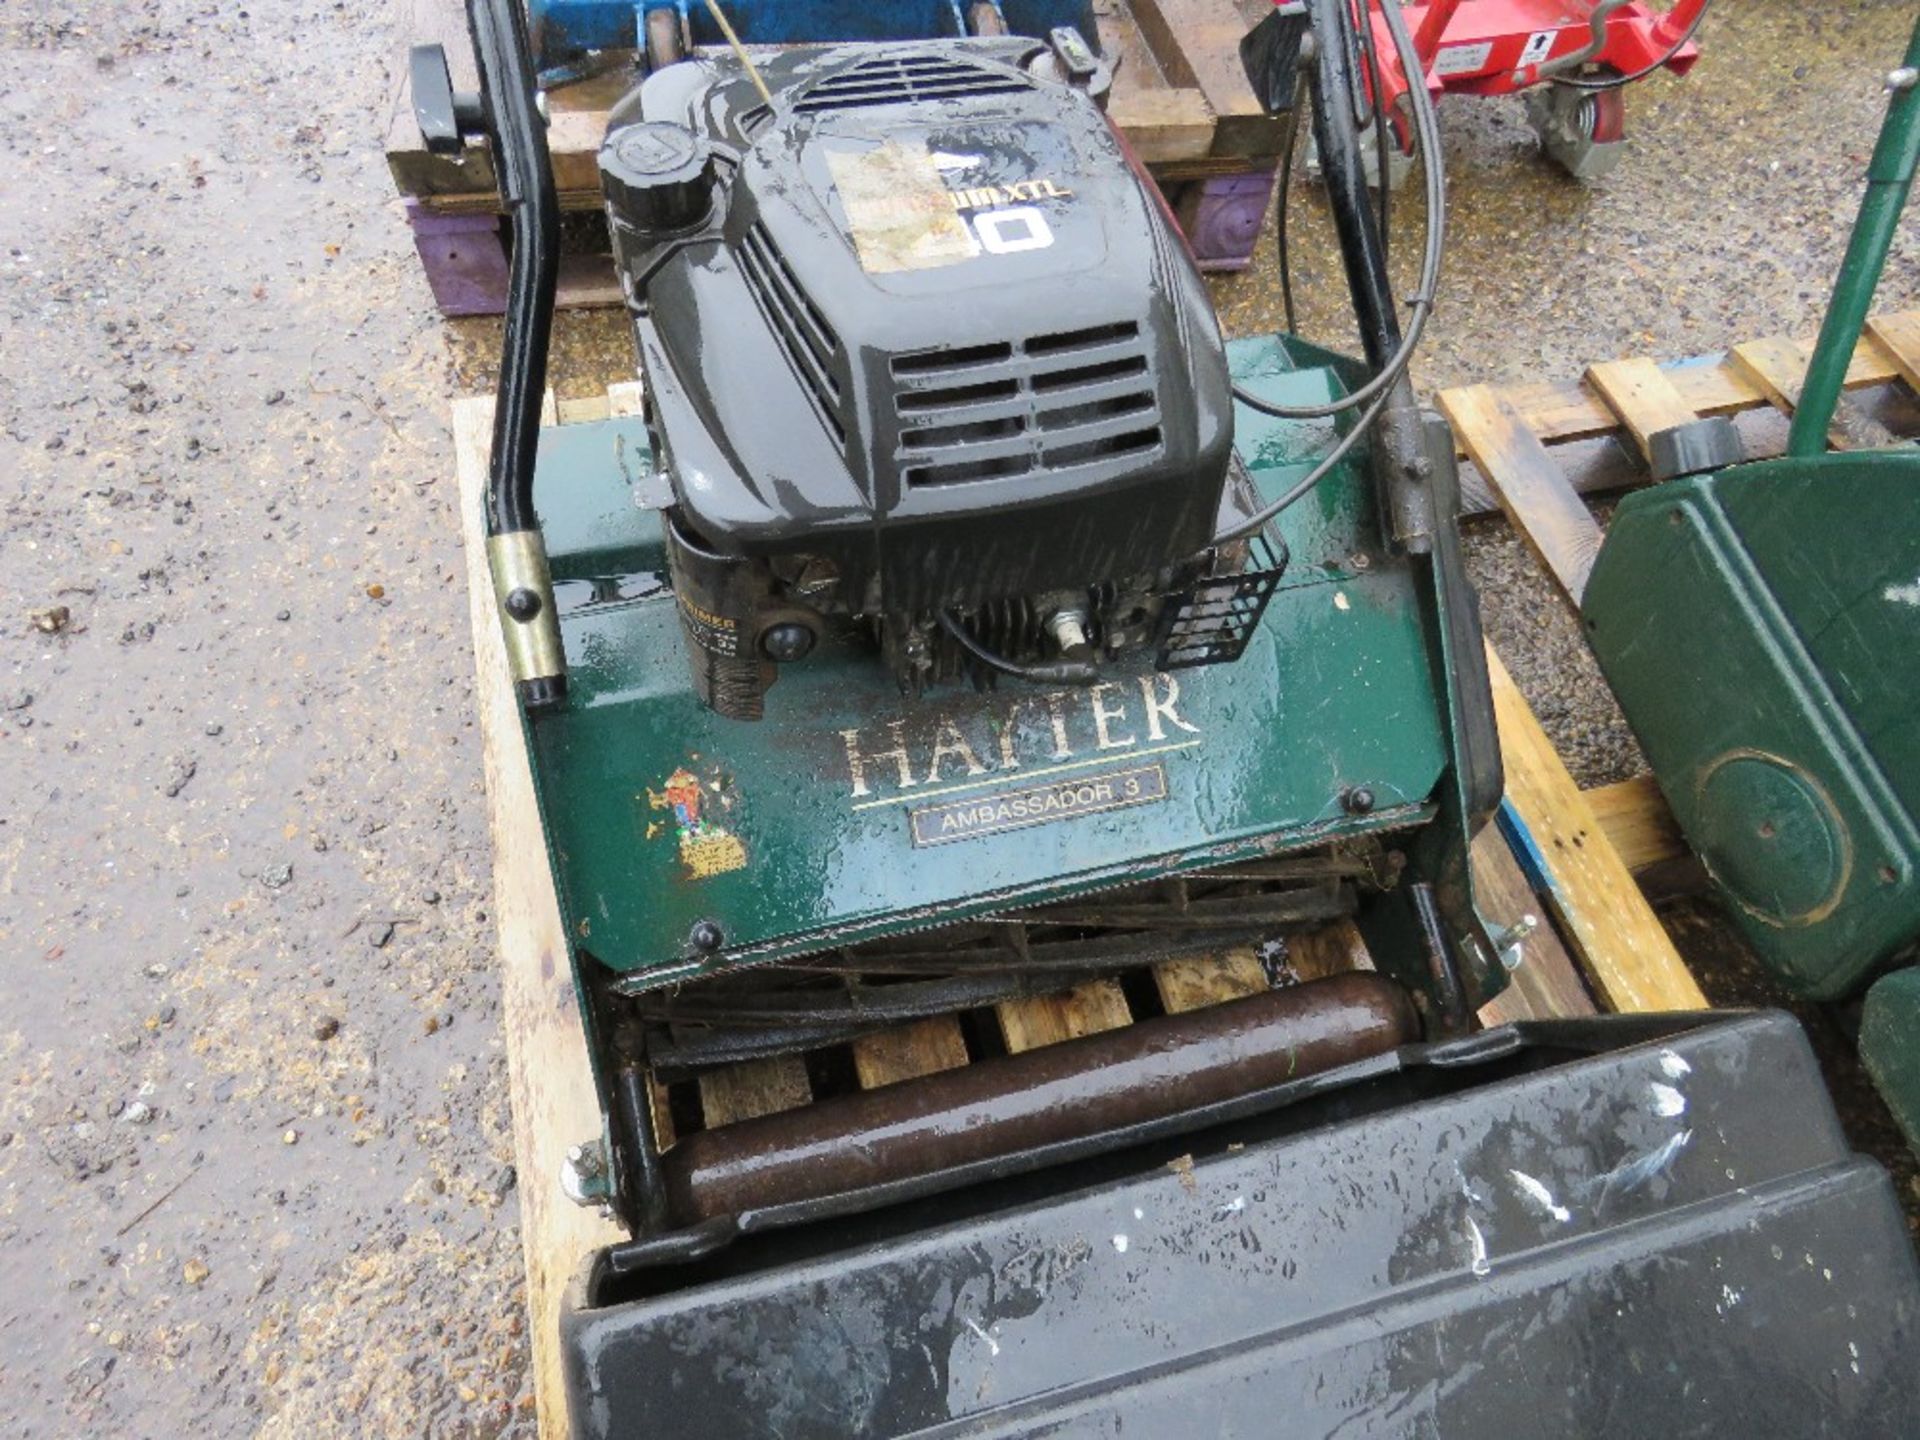 HAYTER CYLINDER MOWER WITH BOX. WHEN TESTED WAS SEEN TO RUN AND DRIVE AND BLADES TURNED. - Image 2 of 4